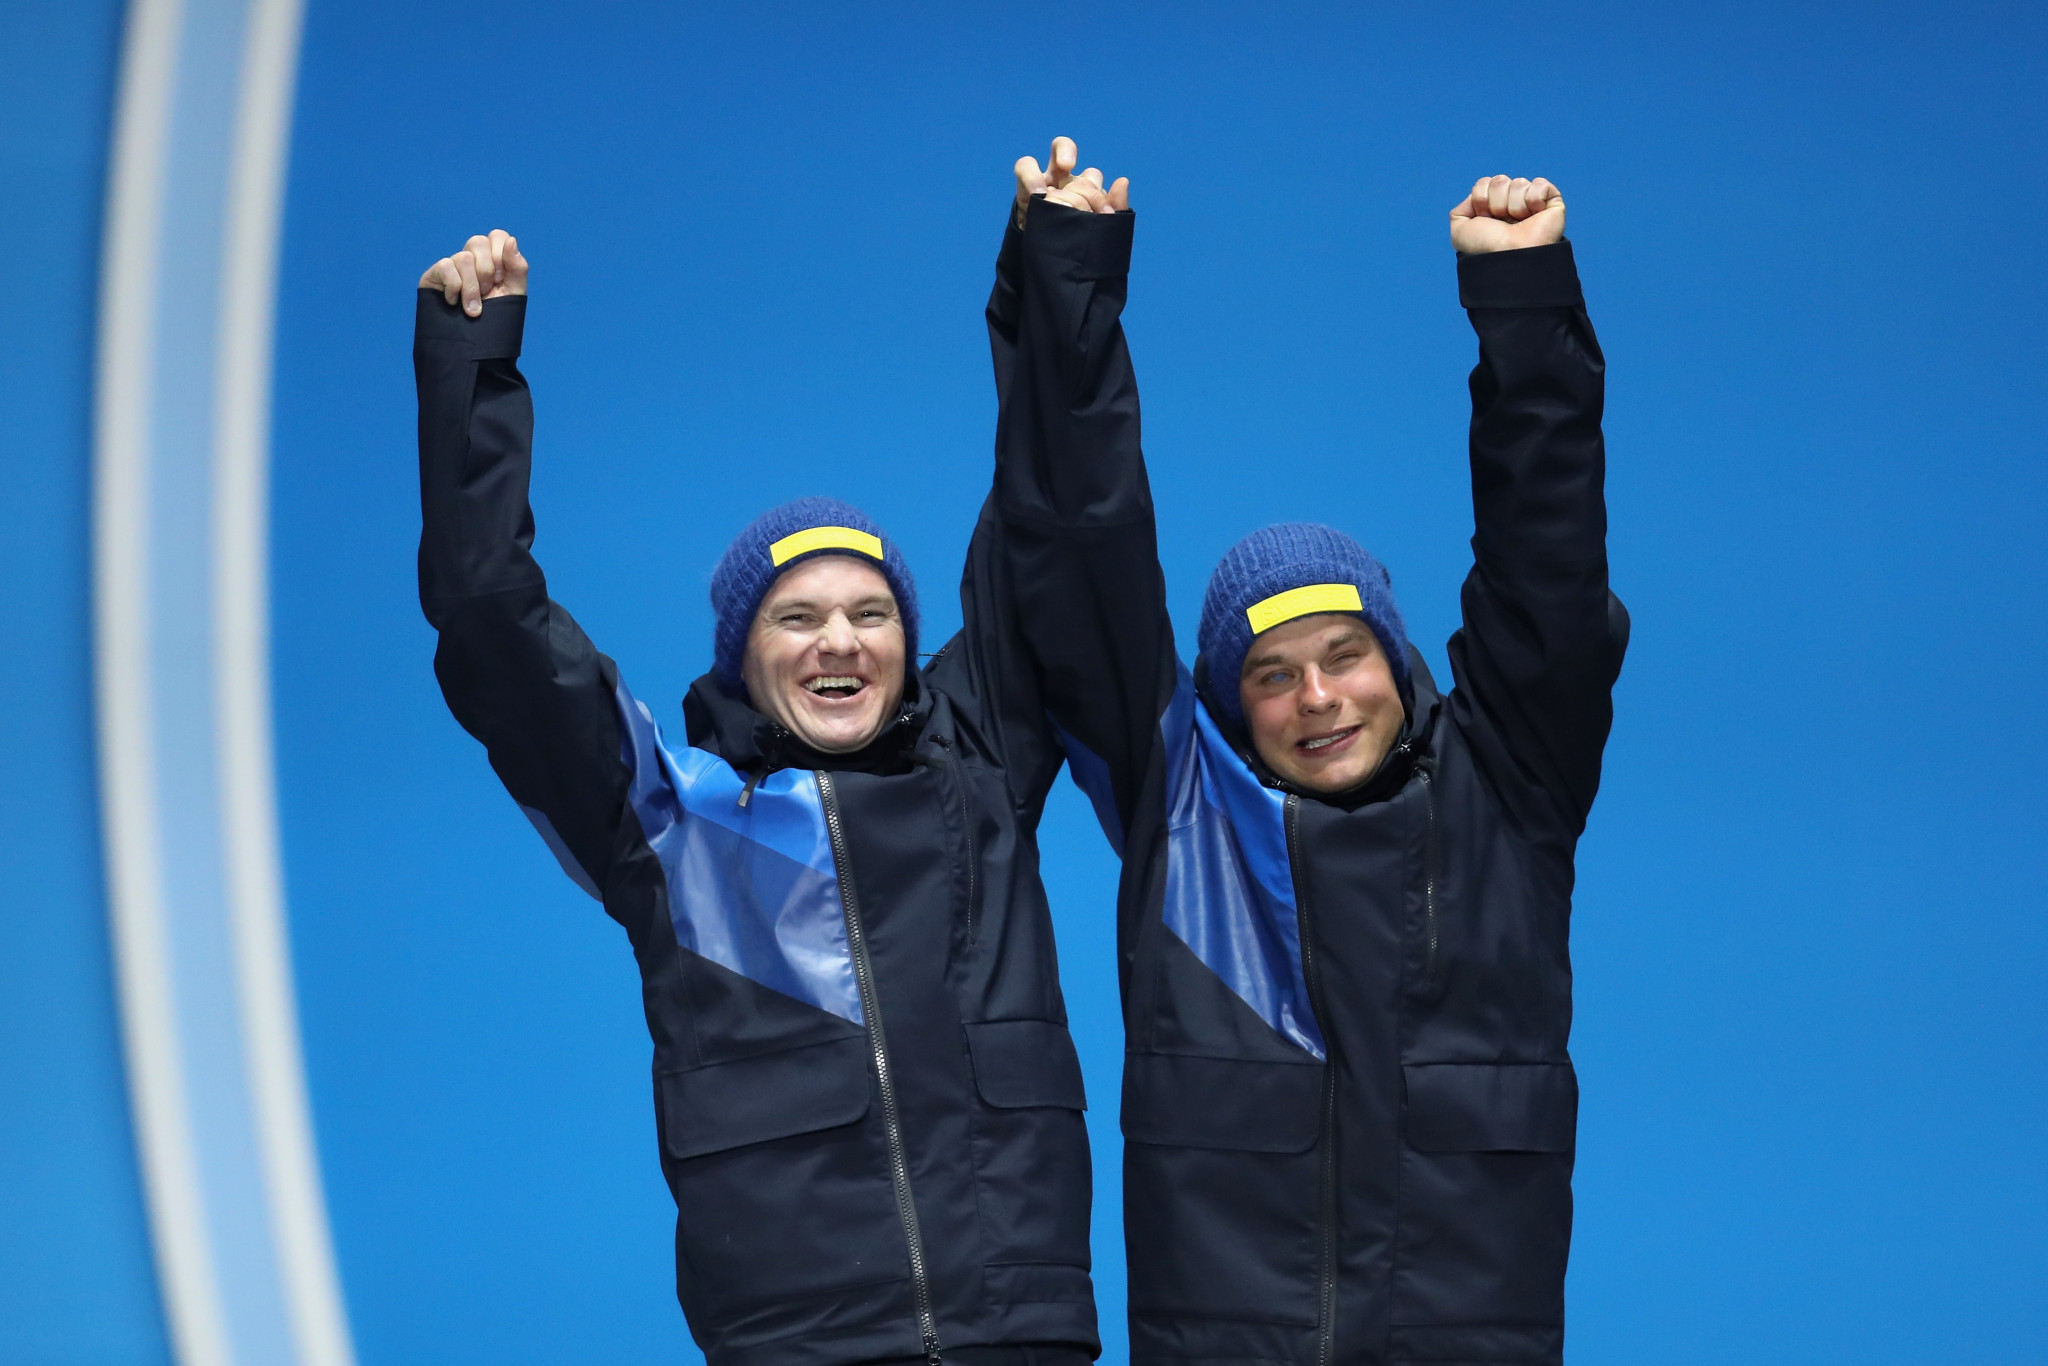 Robin Bryntesson, left, was Zebastian Modin's guide when he won a silver medal at Pyeongchang 2018 ©Getty Images